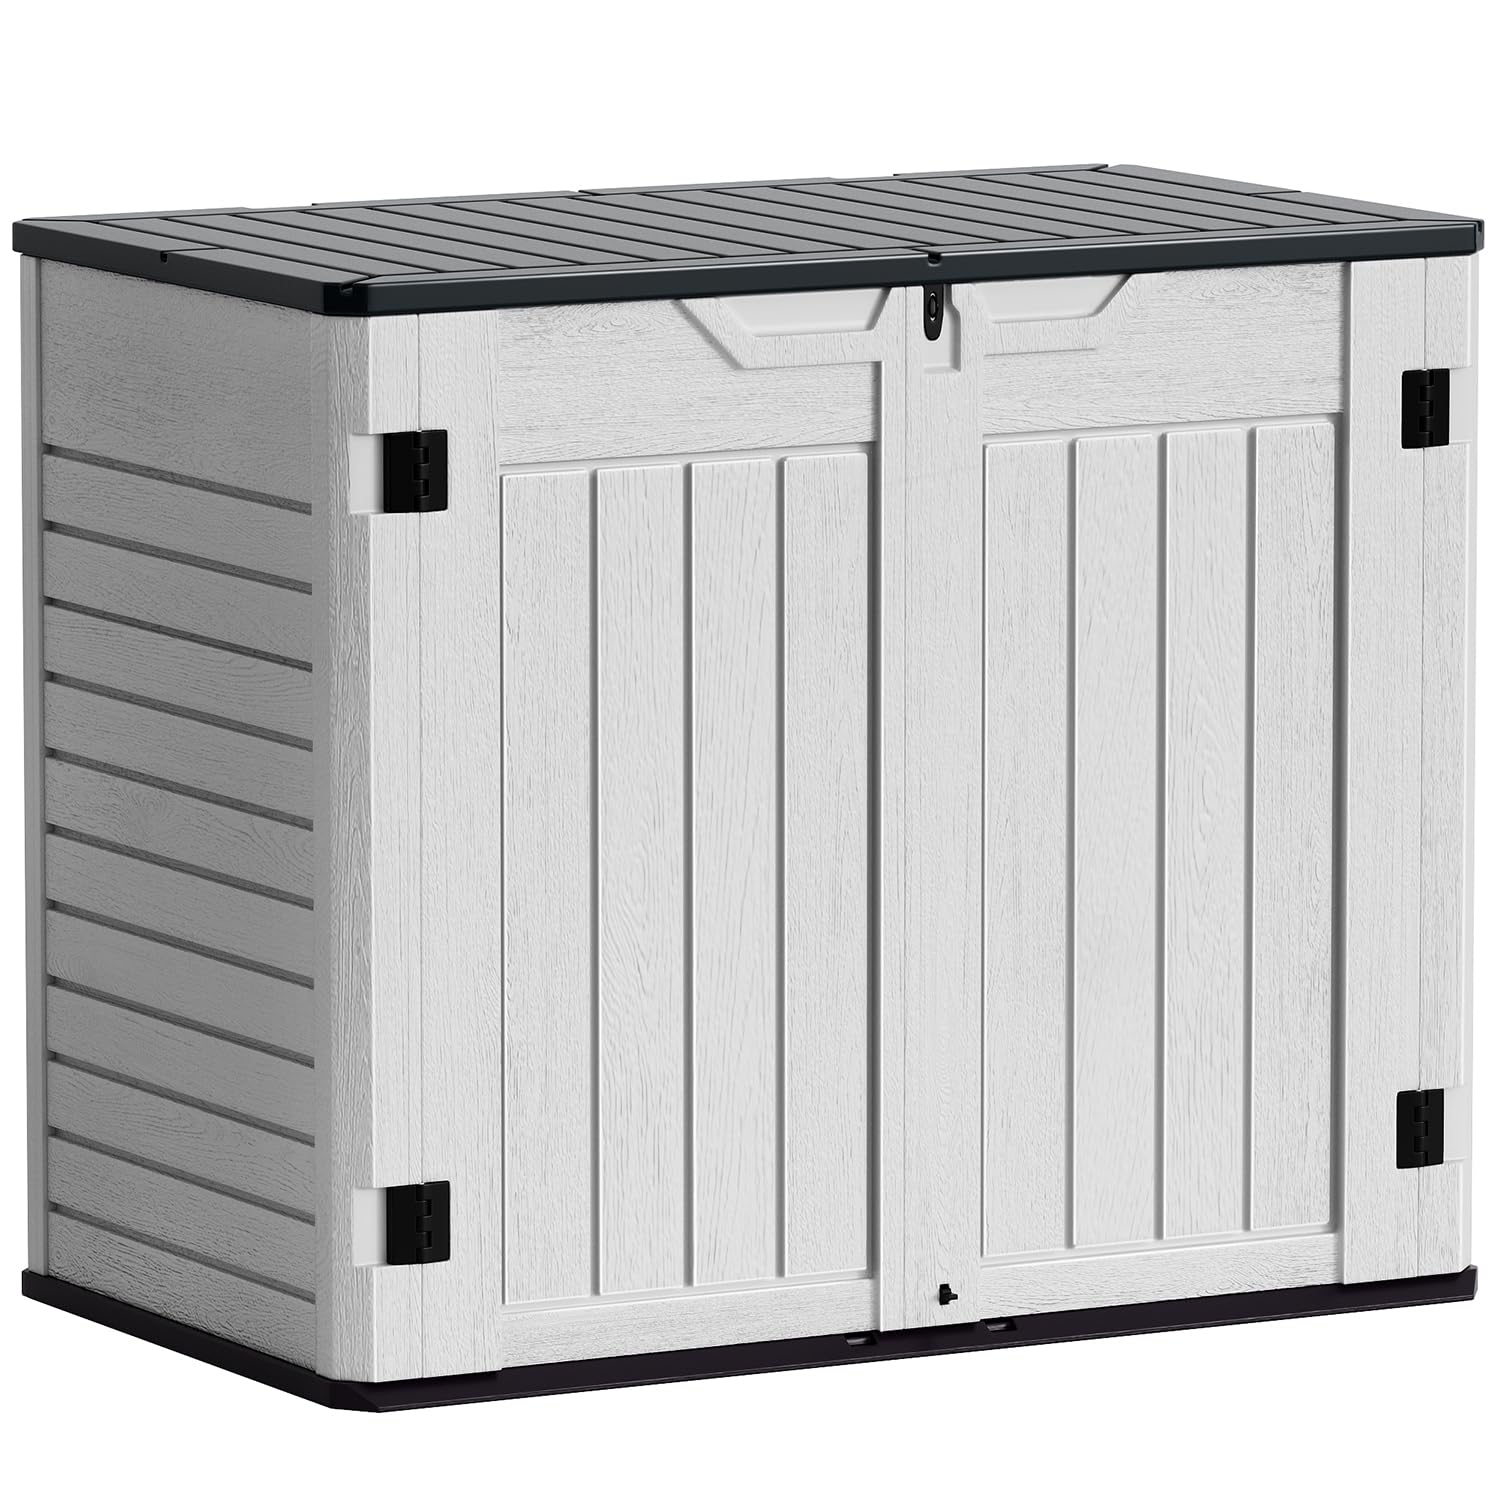 KINYING Resin Deck box, Outdoor Storage Container, Large